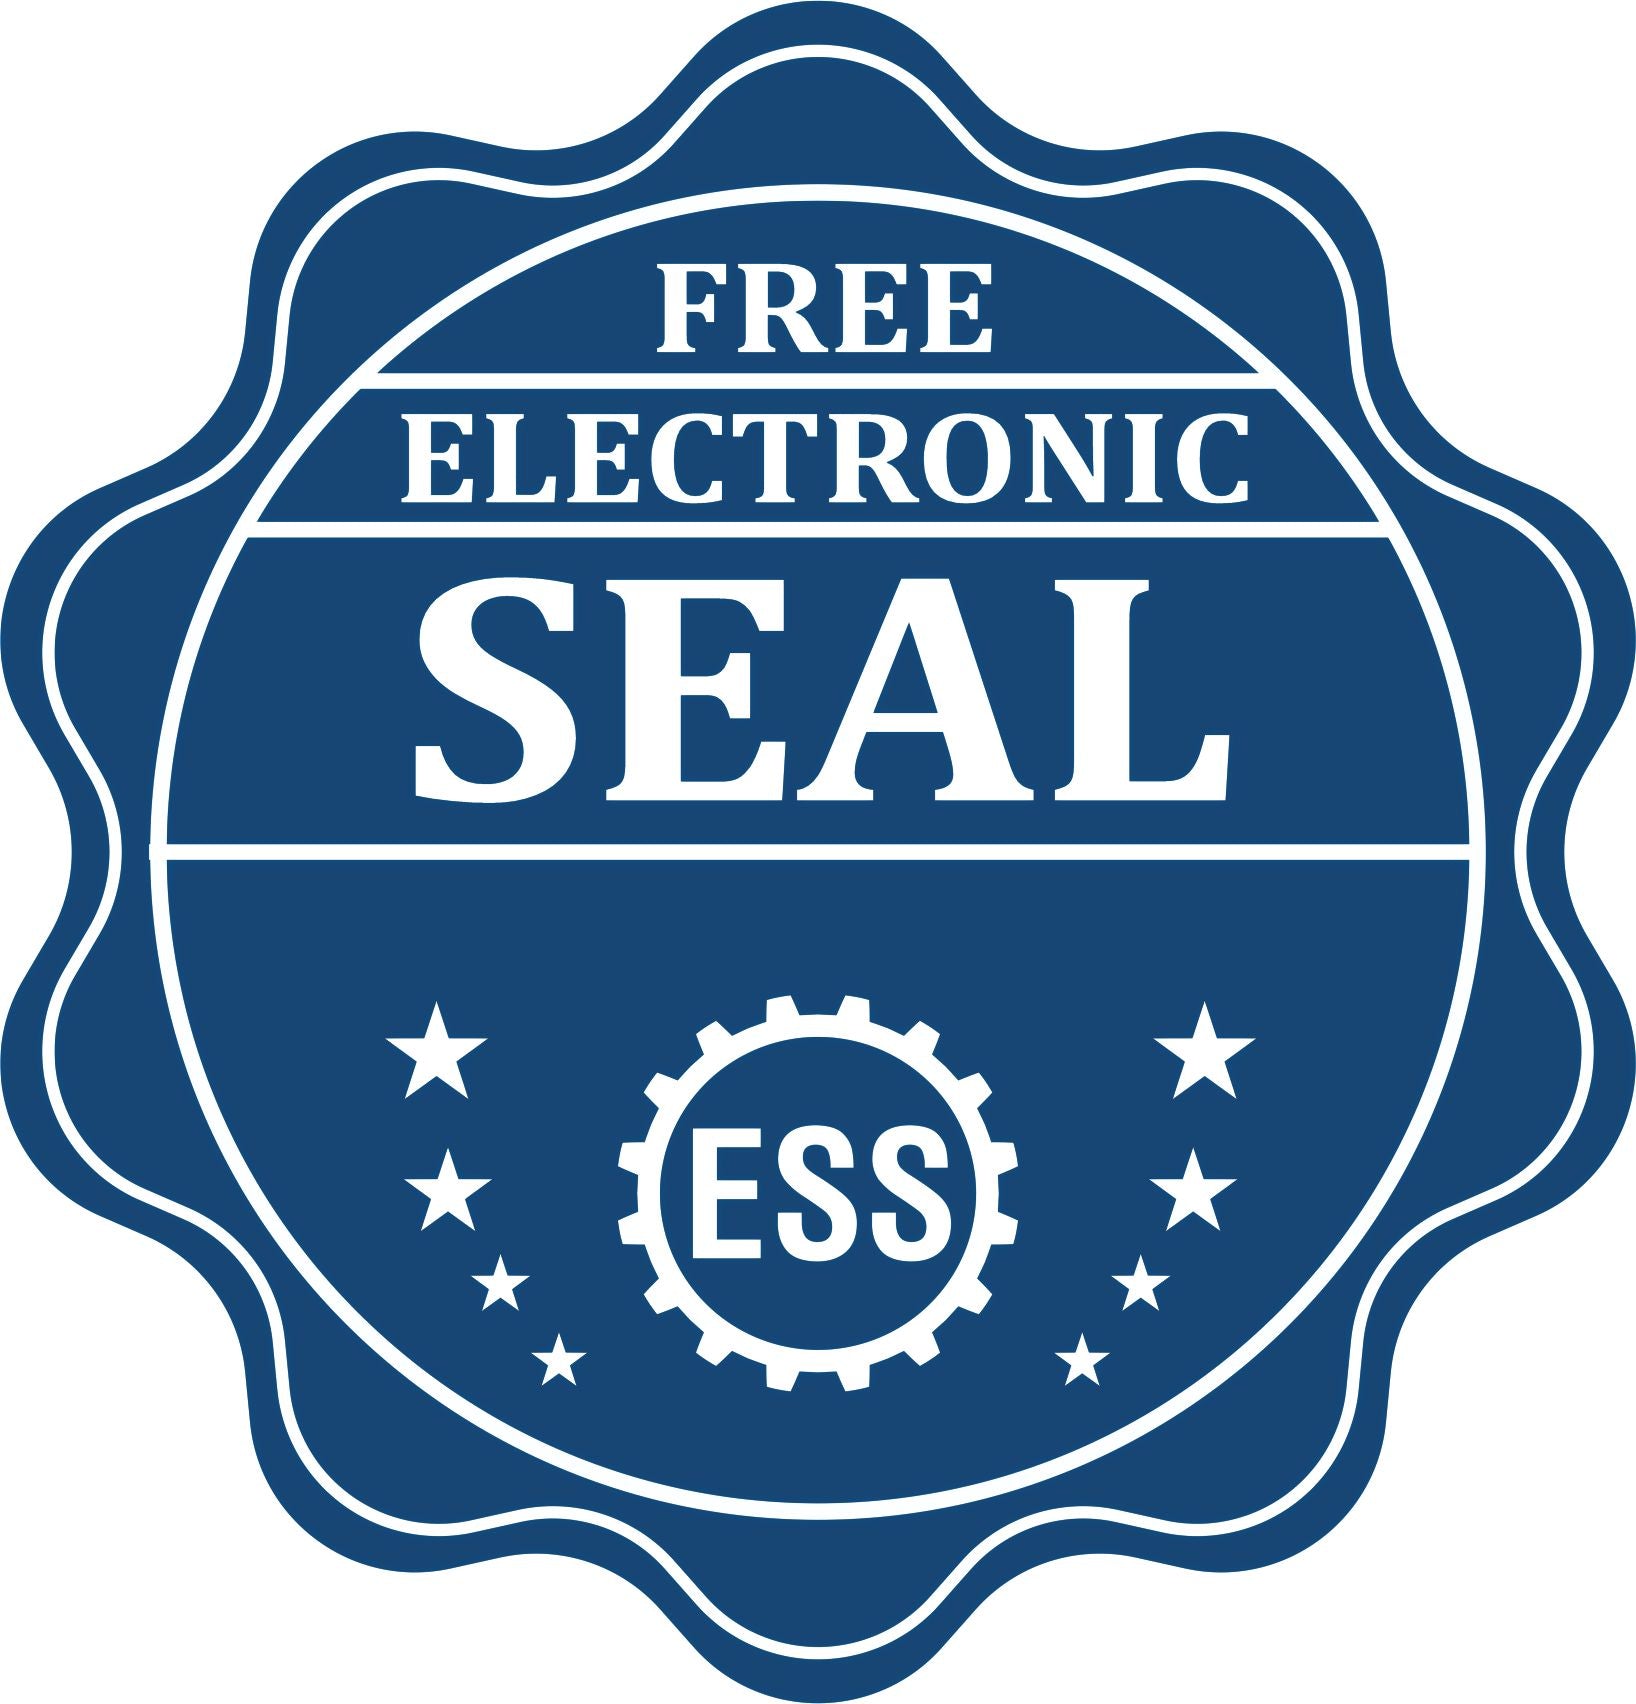 A badge showing a free electronic seal for the Iowa Engineer Desk Seal with stars and the ESS gear on the emblem.